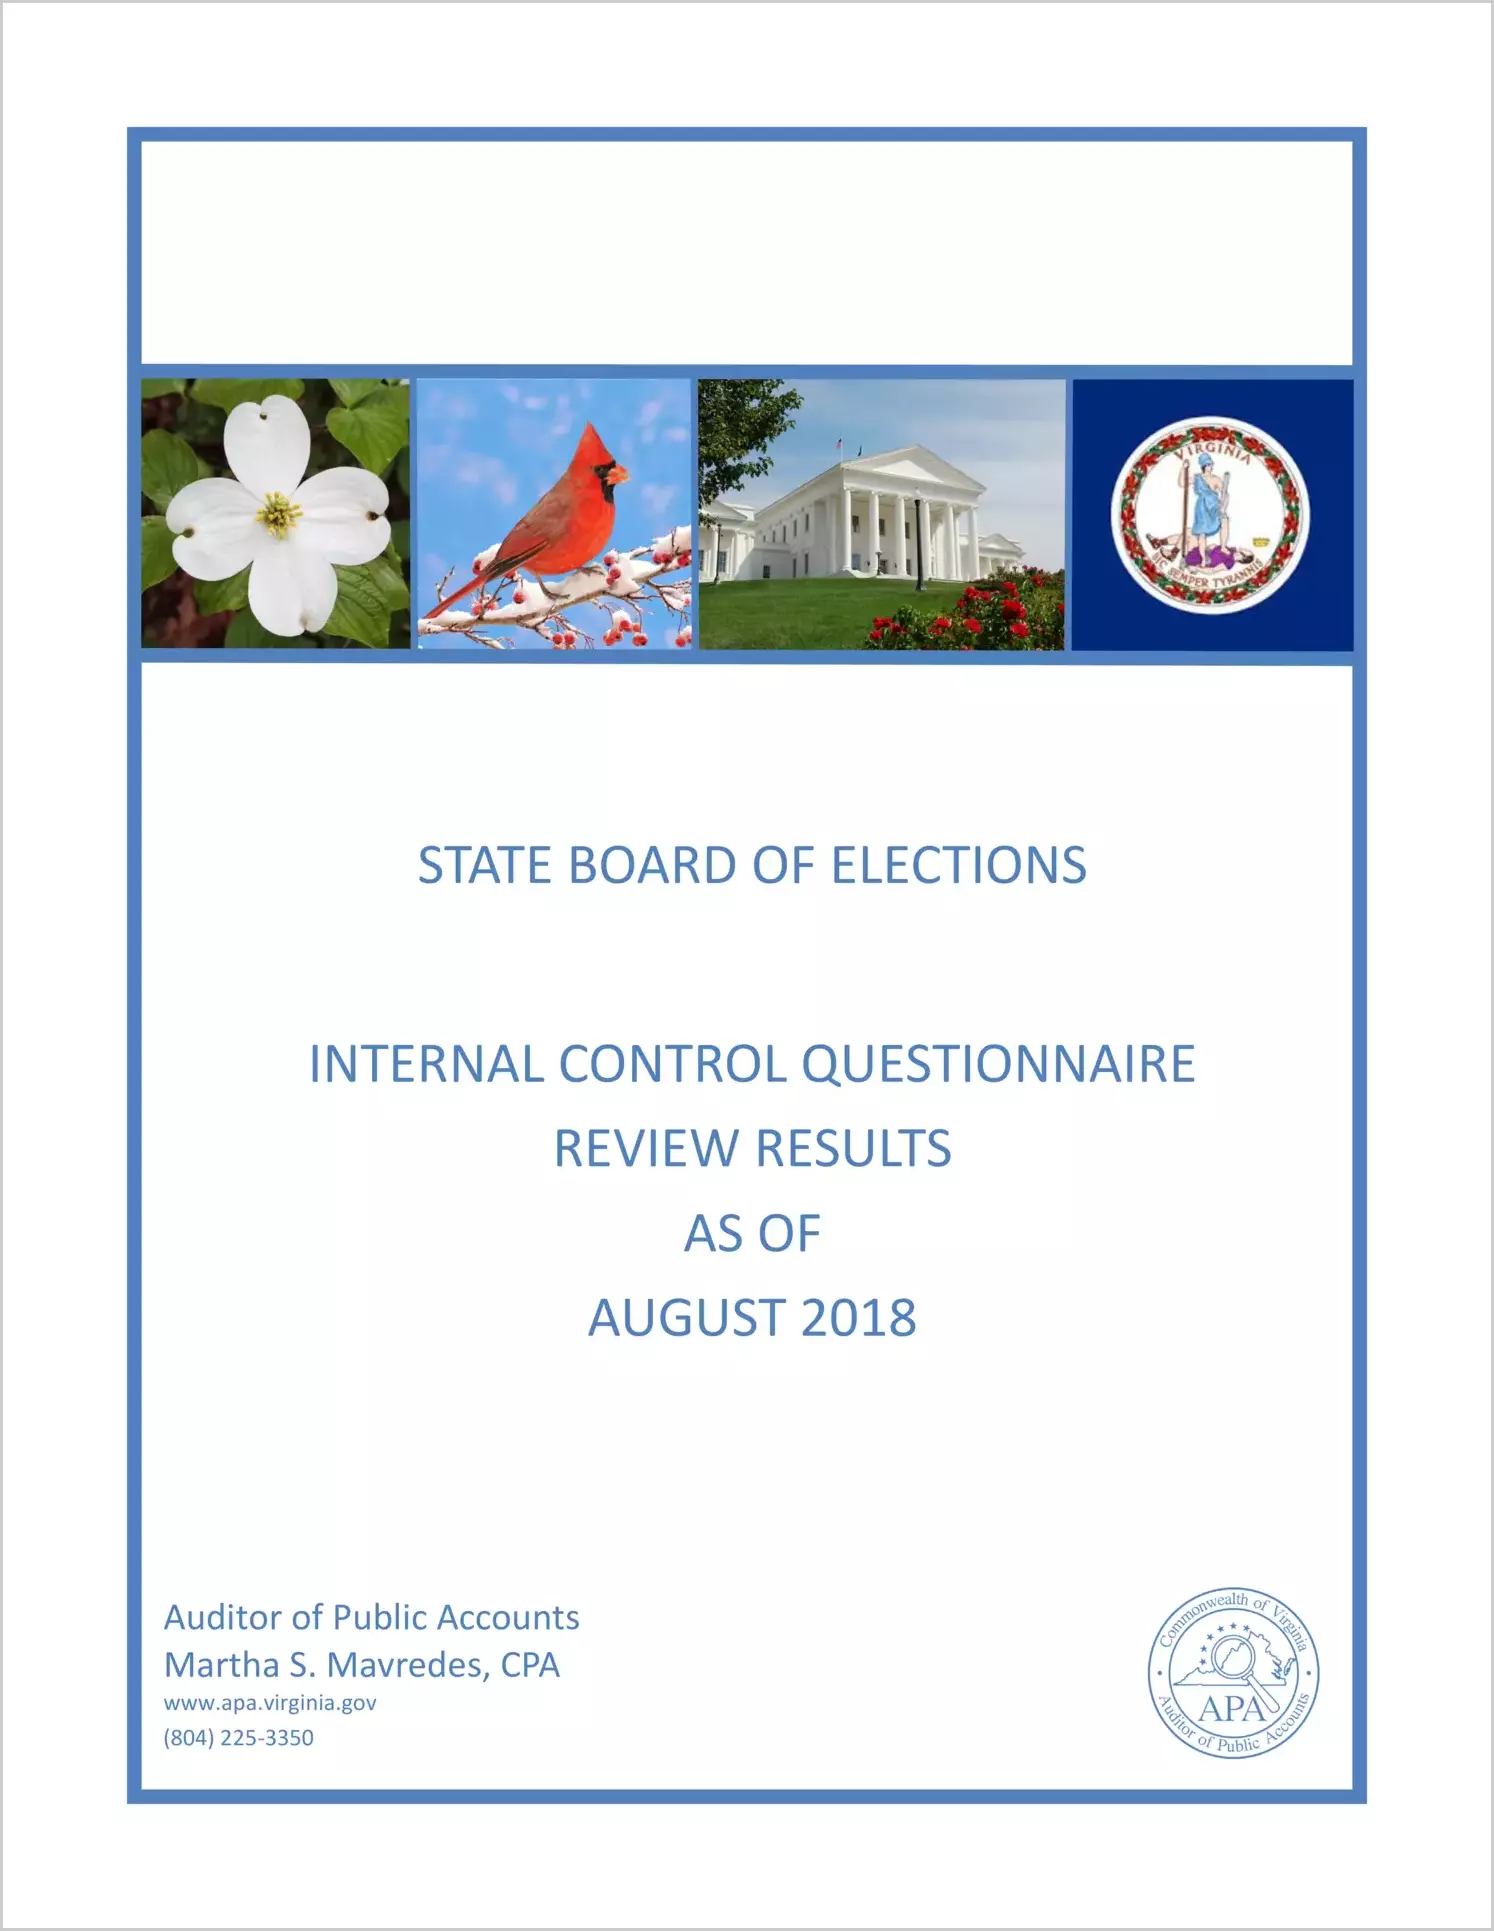 State Board of Elections Internal Control Questionnaire Review Results as of August 2018